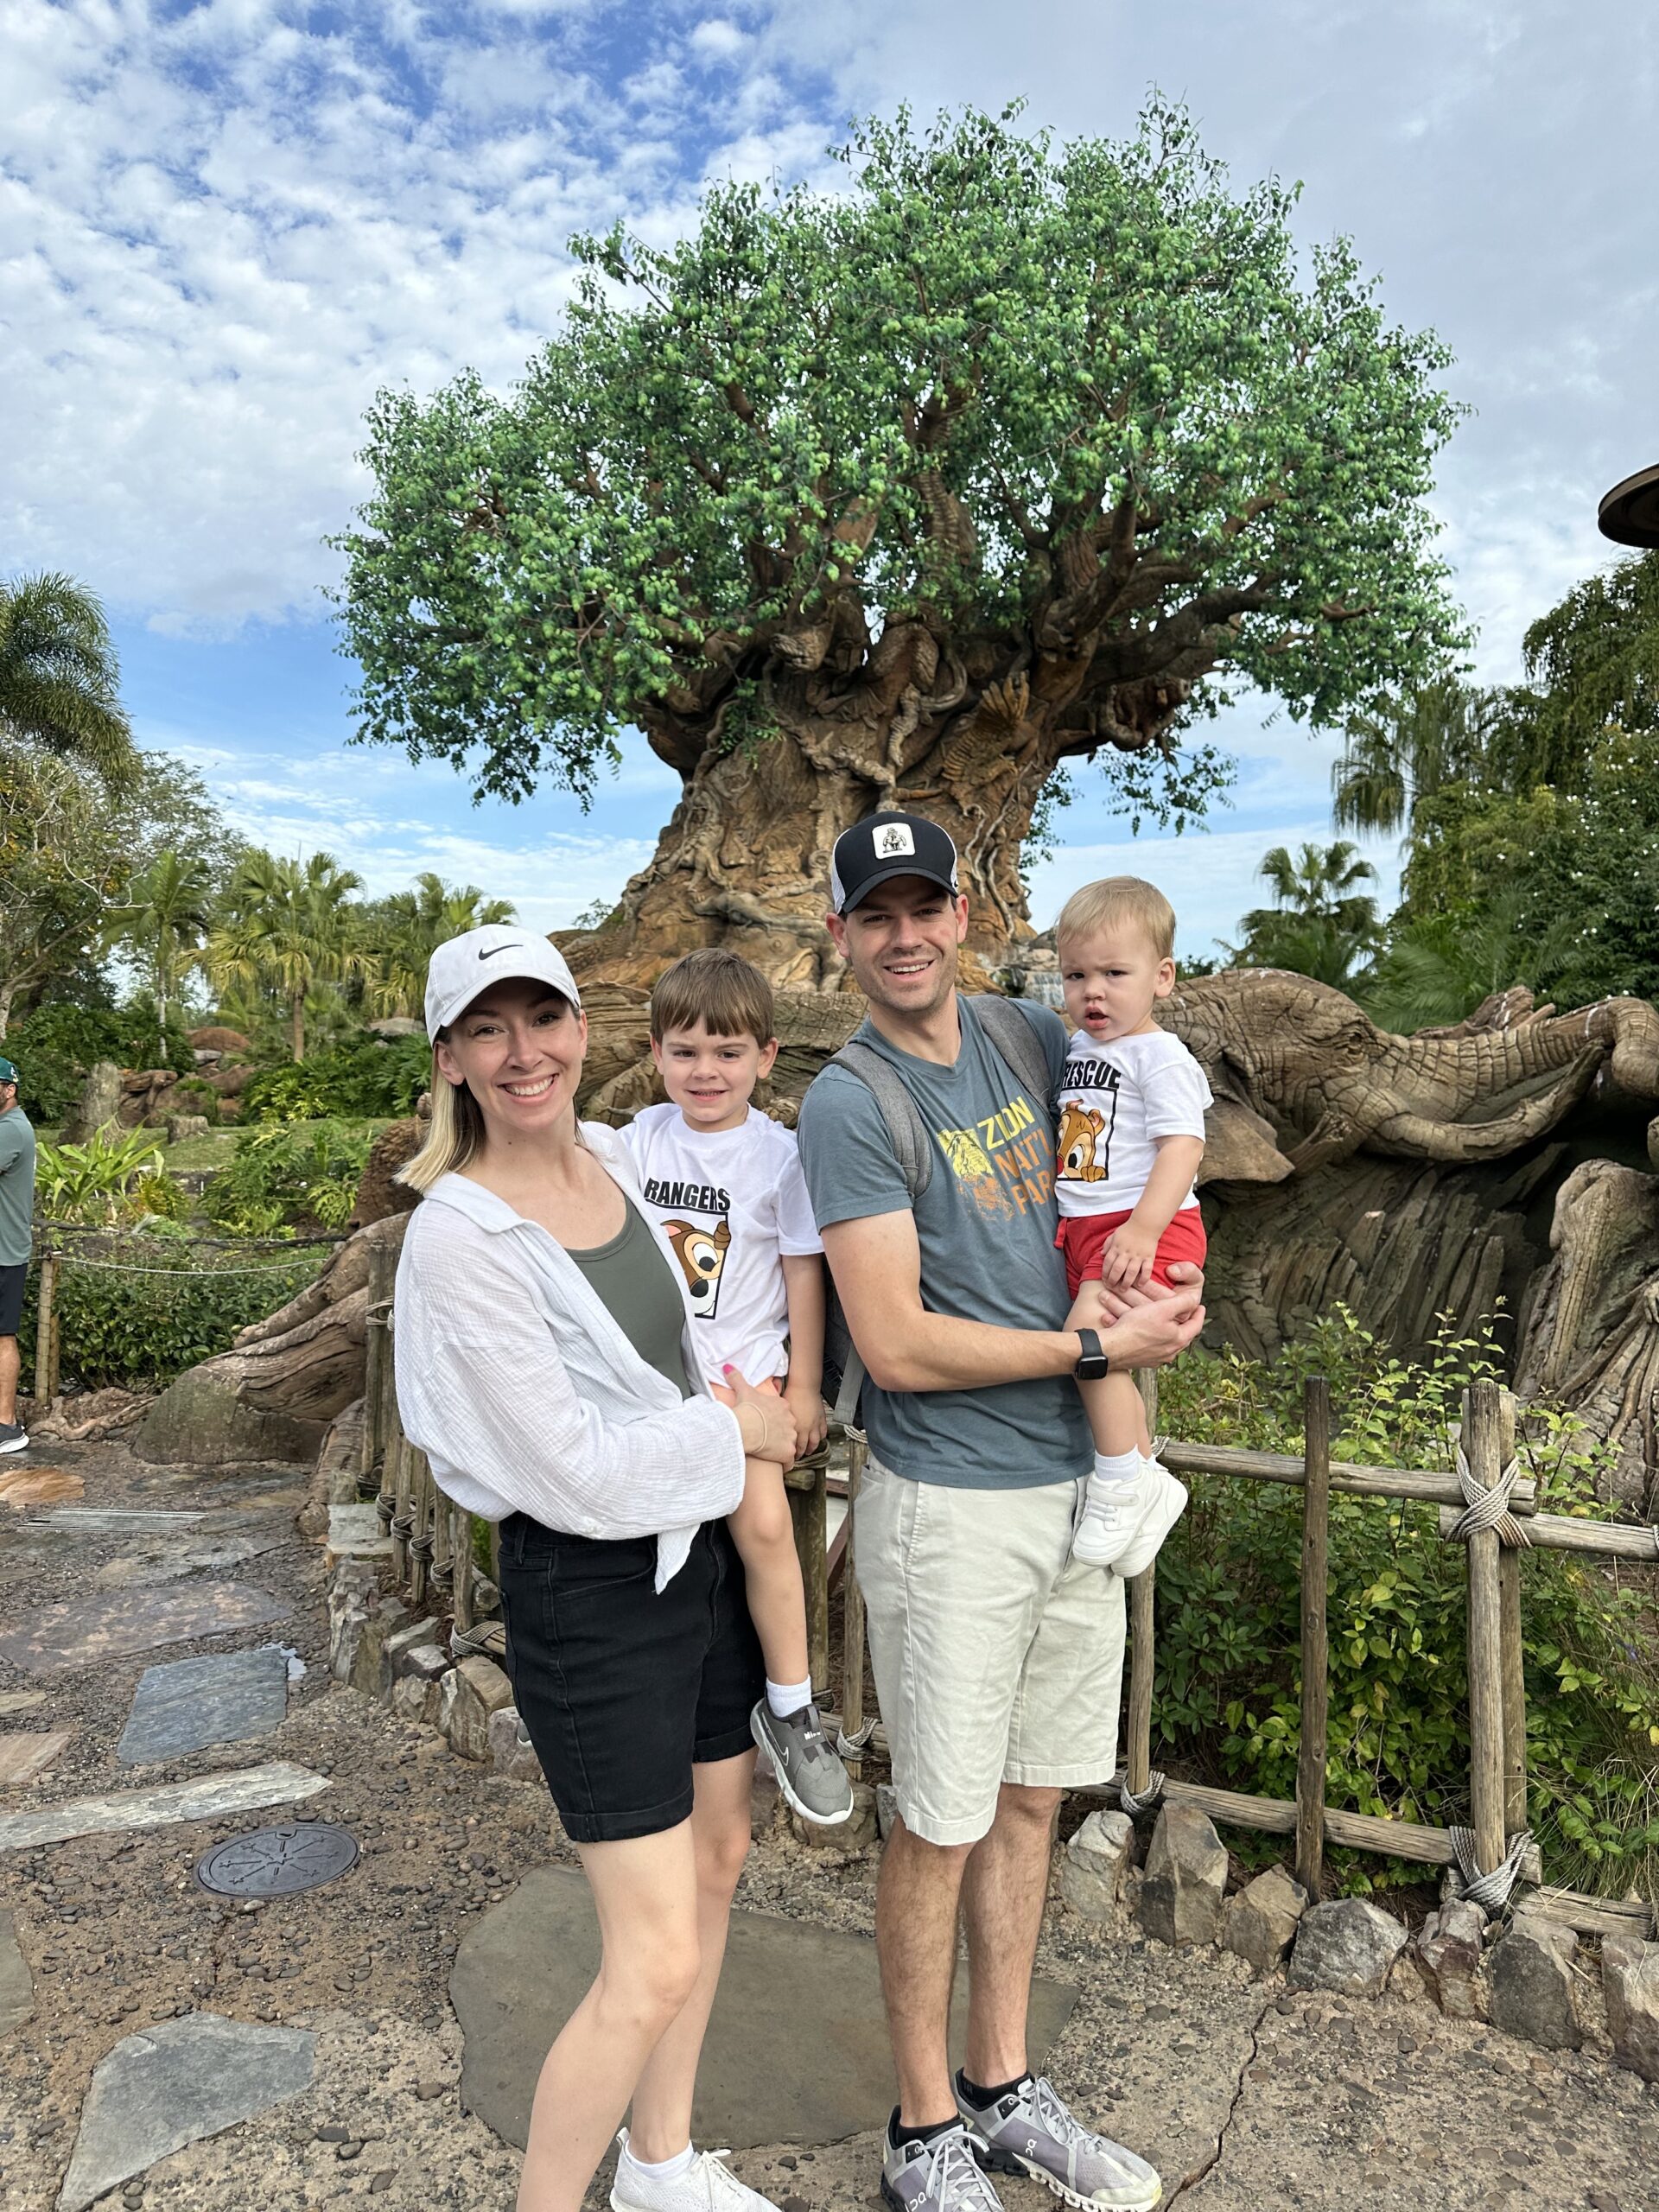 Disney Credit Card: Worth It? Rewards & Costs from my Experience